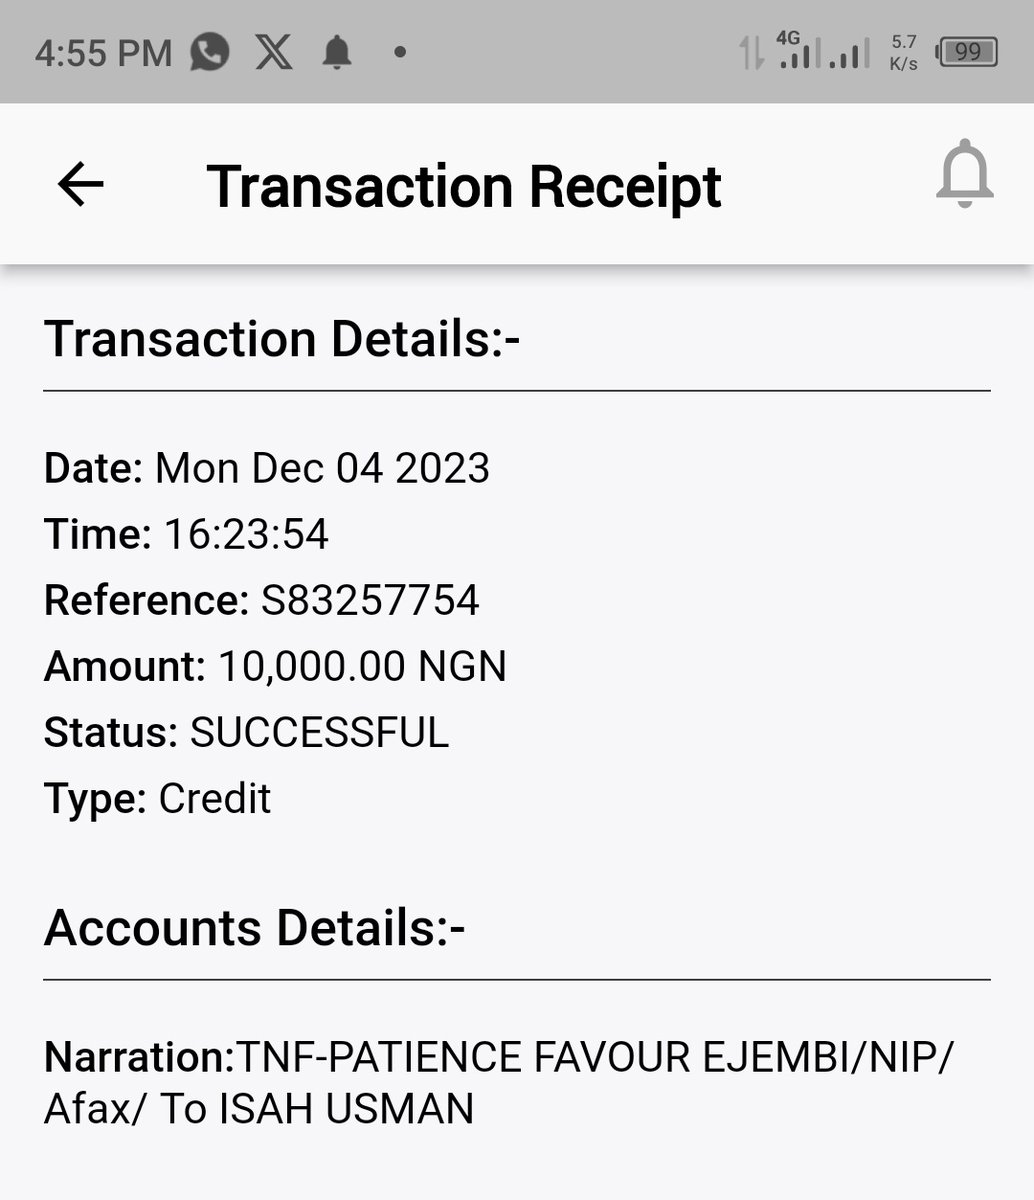 @Tutsy22 @m4praise @Soliudeen20 @Iam_thoseeen @sunshine2my @julietogechi941 @Ikyeghjoy @tonydav21 Wooow AFAX1783 Alert Received With Much Gratitude Mummy @Tutsy22  May God Continue Blessing You Thank You So Much @favour_ejembi May God Reward You Both The Giver And The Sponsor Too 🙏🙏🙏🙏
#AdoptaFamilyAtXmas 
#AdoptaFamilyAtXmas 
#AdoptaFamilyAtXmas